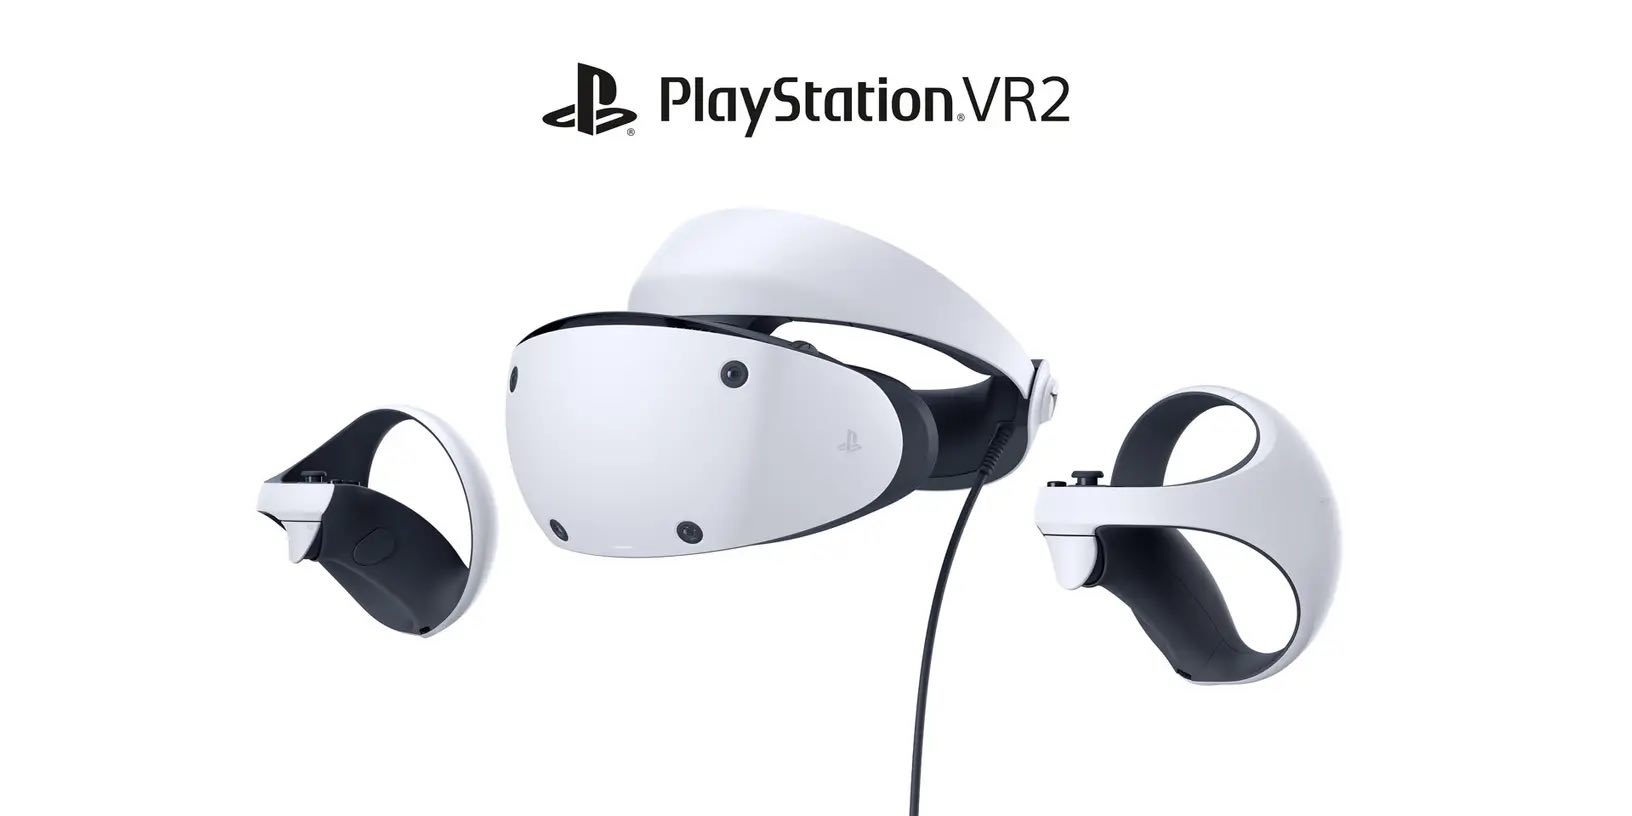 New PS VR2 trailer showcases features, games, and more